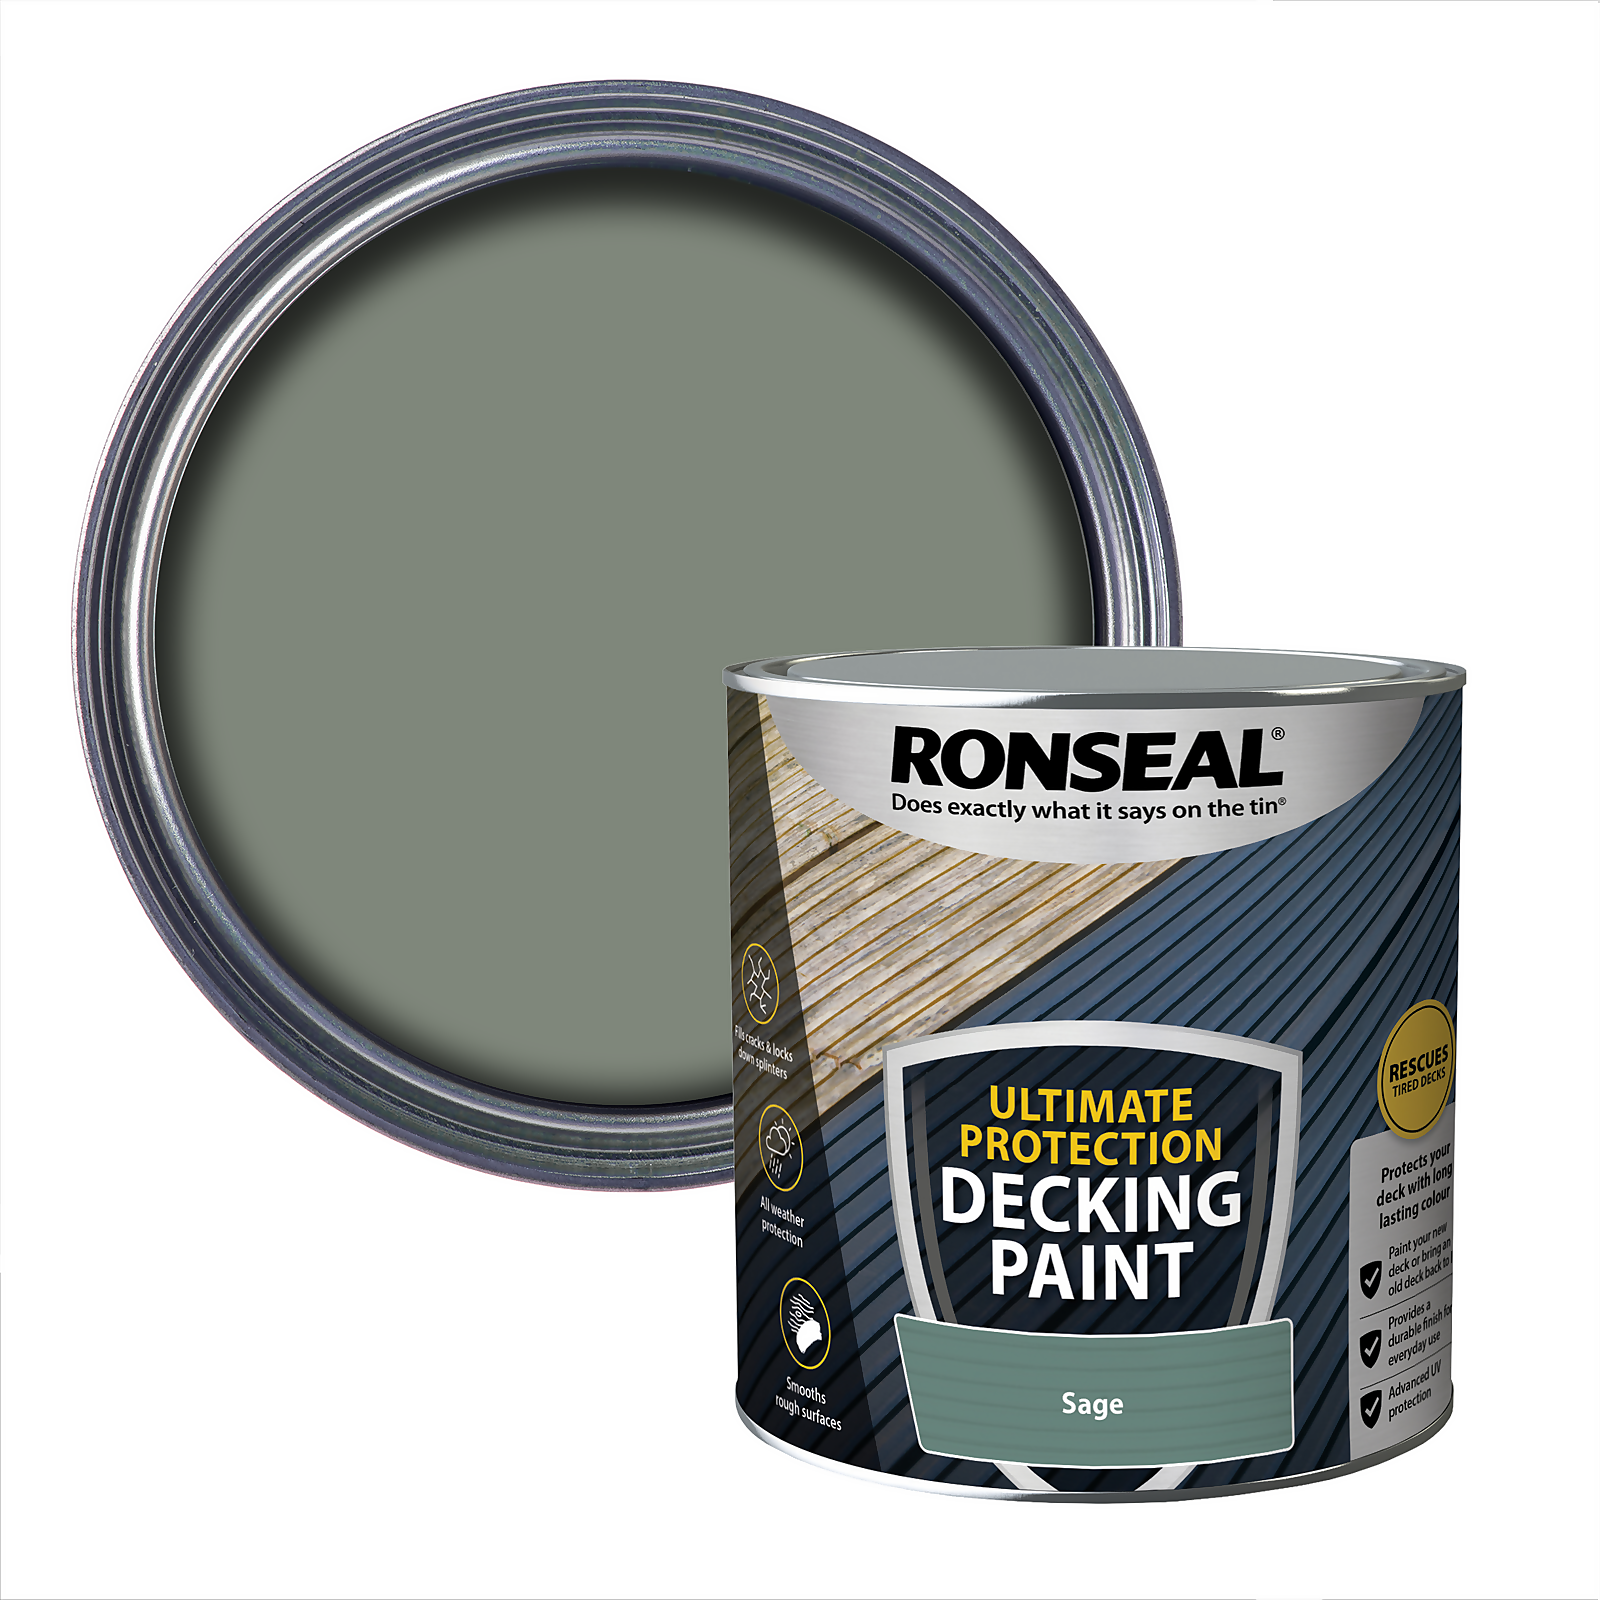 Ronseal Ultimate Protection Decking Paint Sage - 2.5L